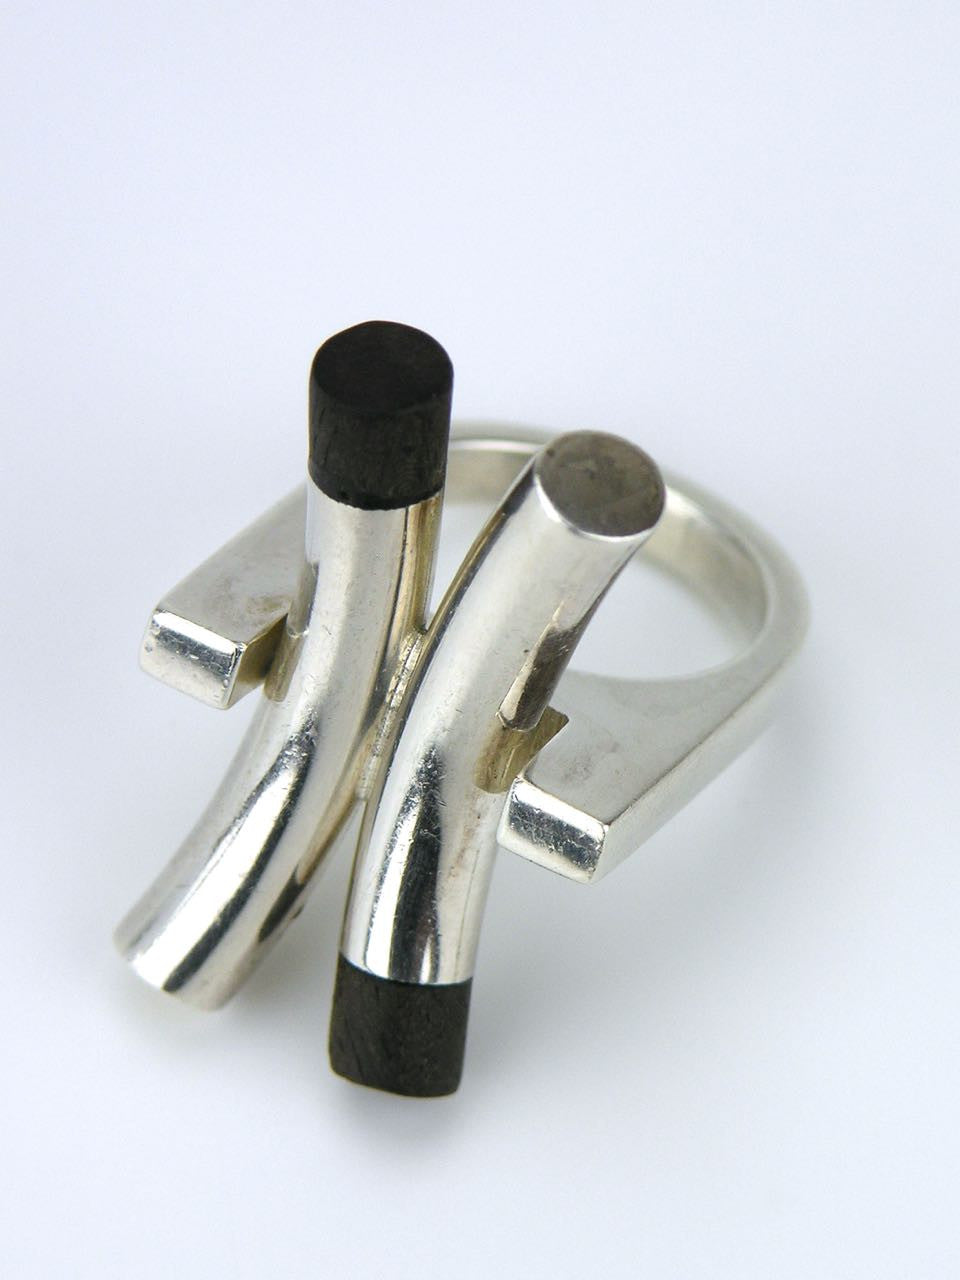 Solid silver and ebony "X" ring